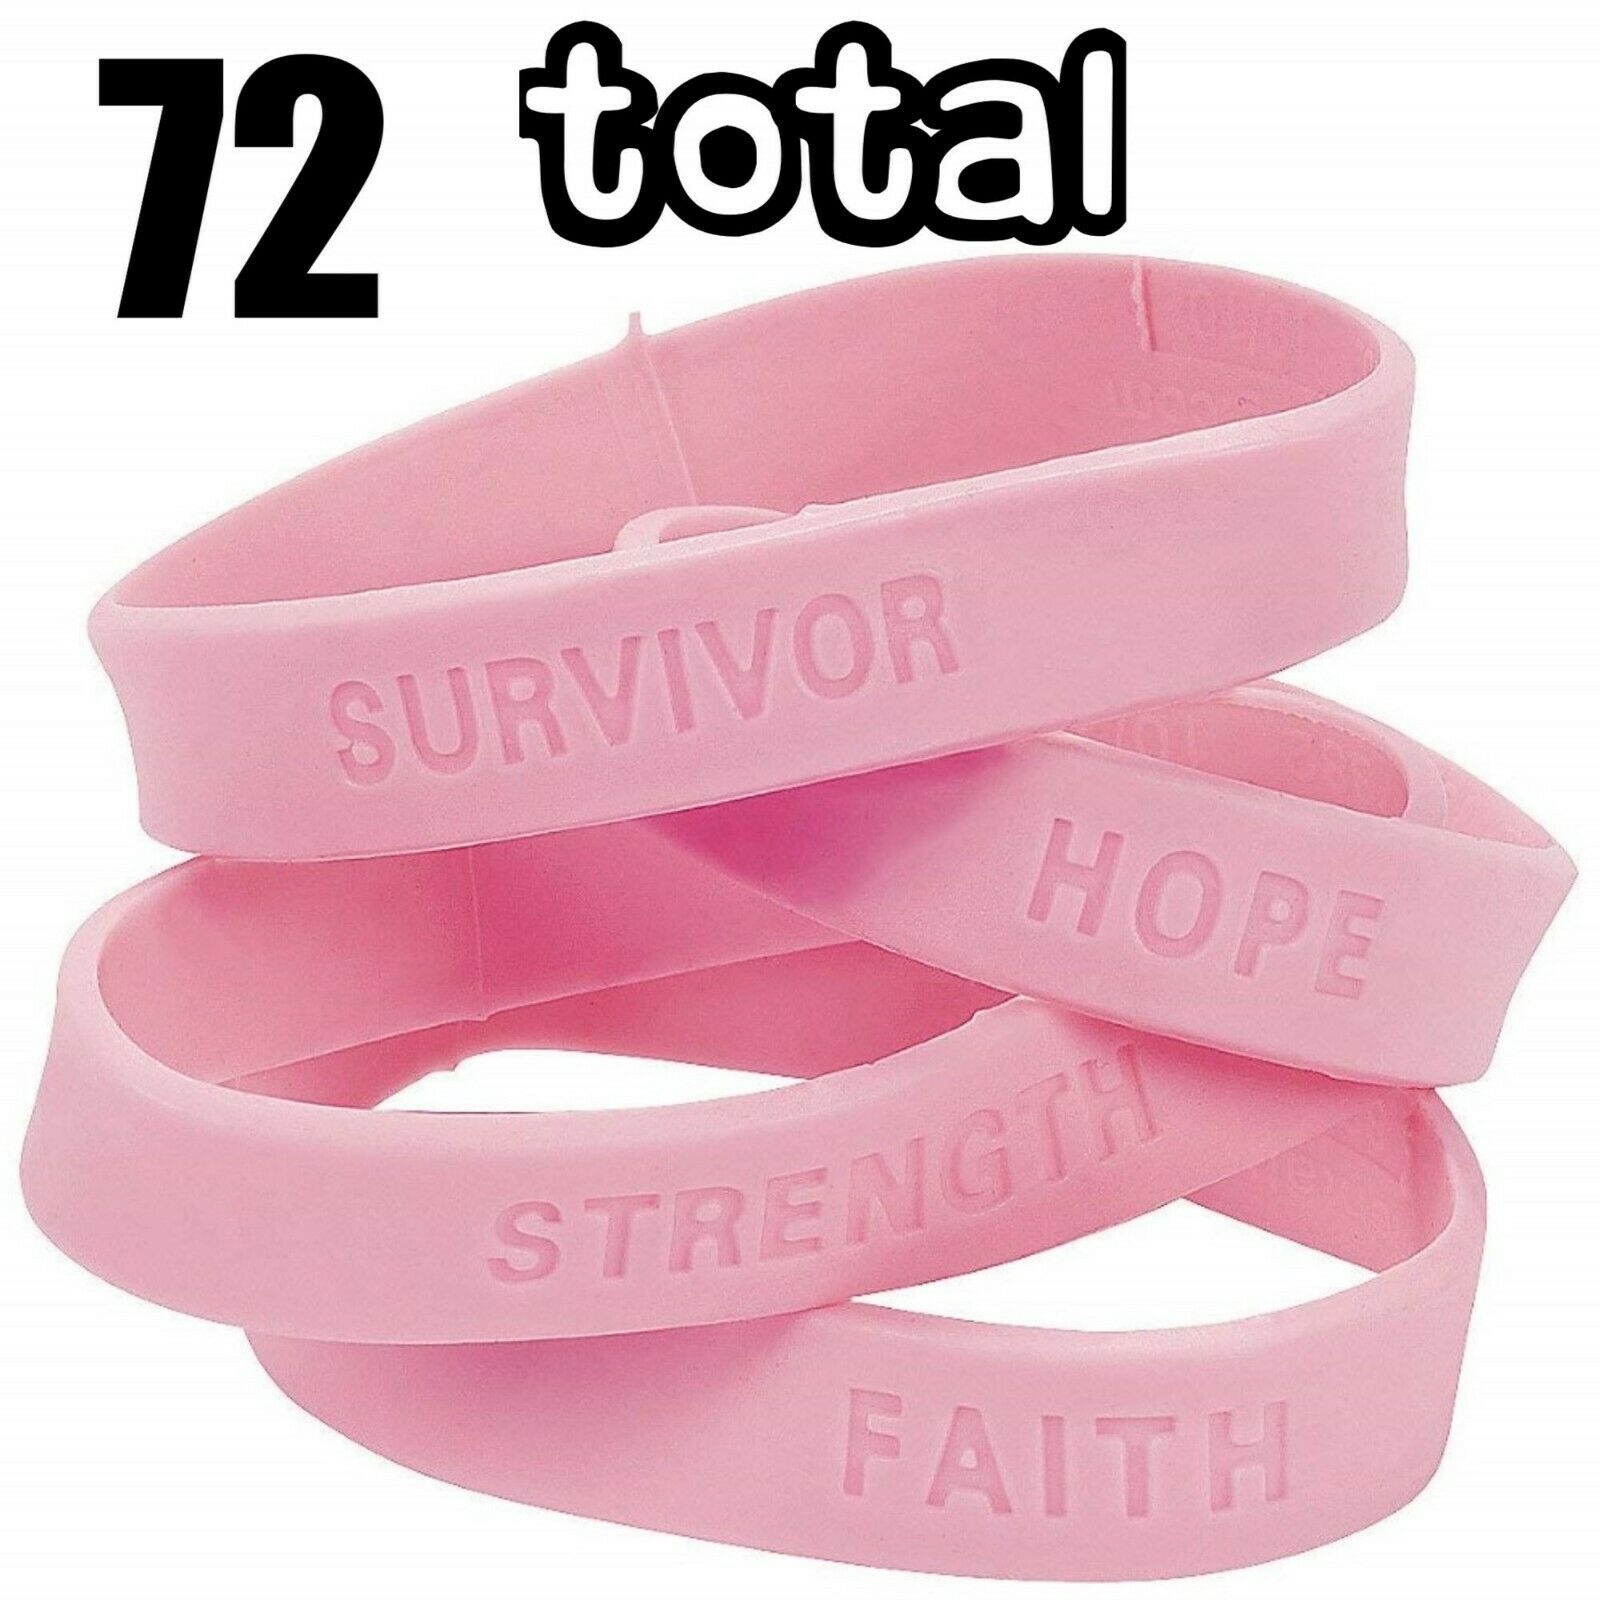 72 Bracelets Pink Breast Cancer Awareness Silicone Rubber Wristbands (6 Dz)